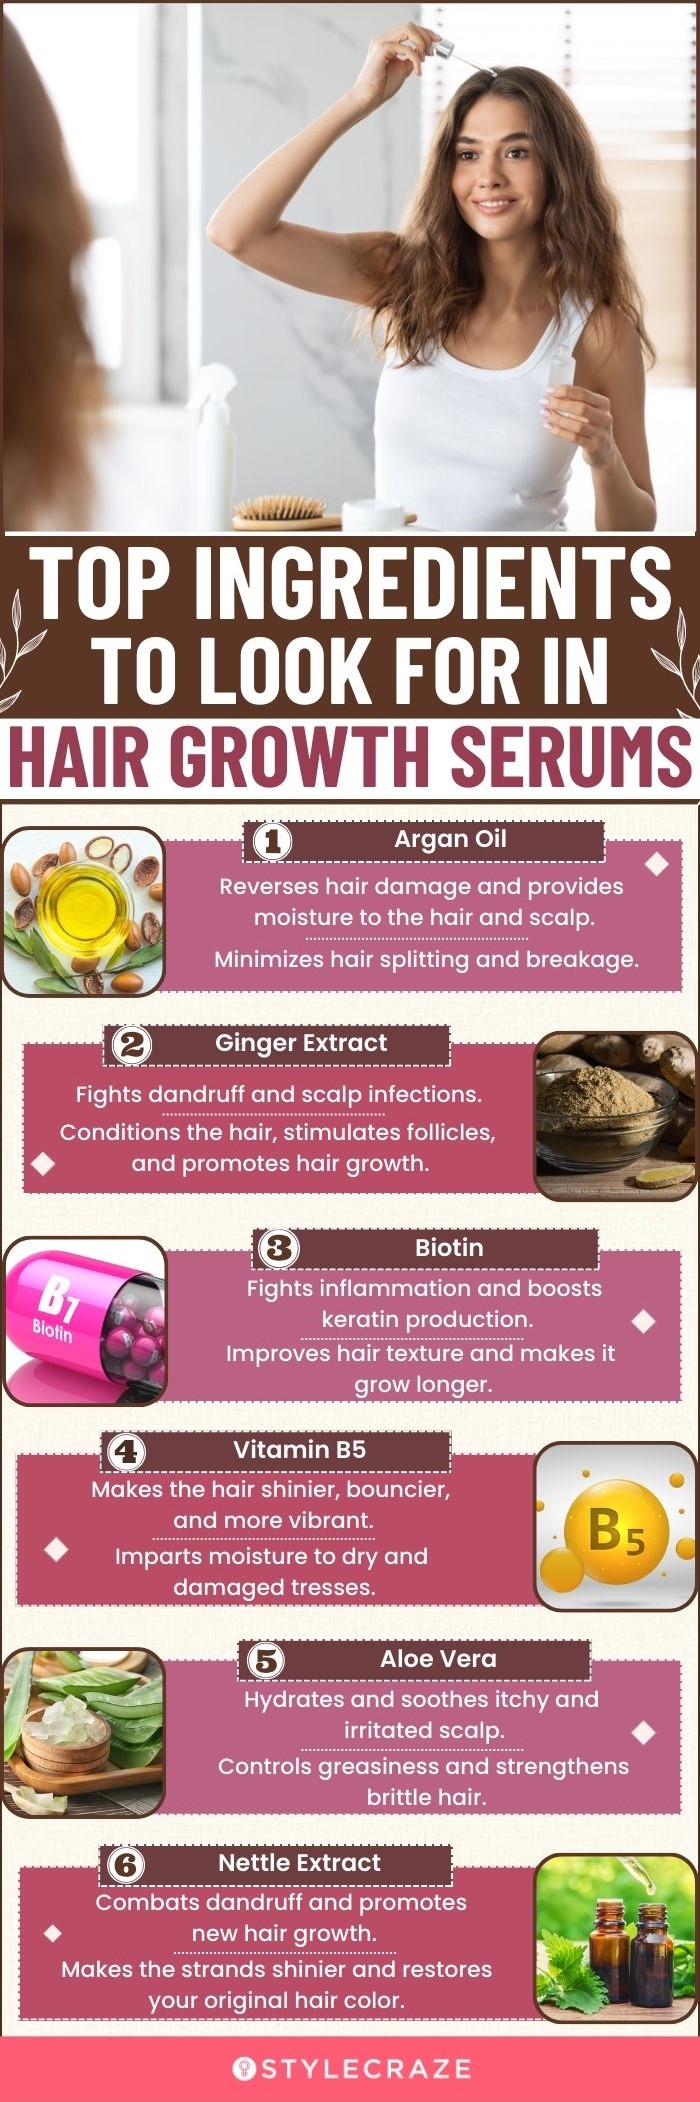 Top Ingredients To Look For In Hair Growth Serums (infographic)